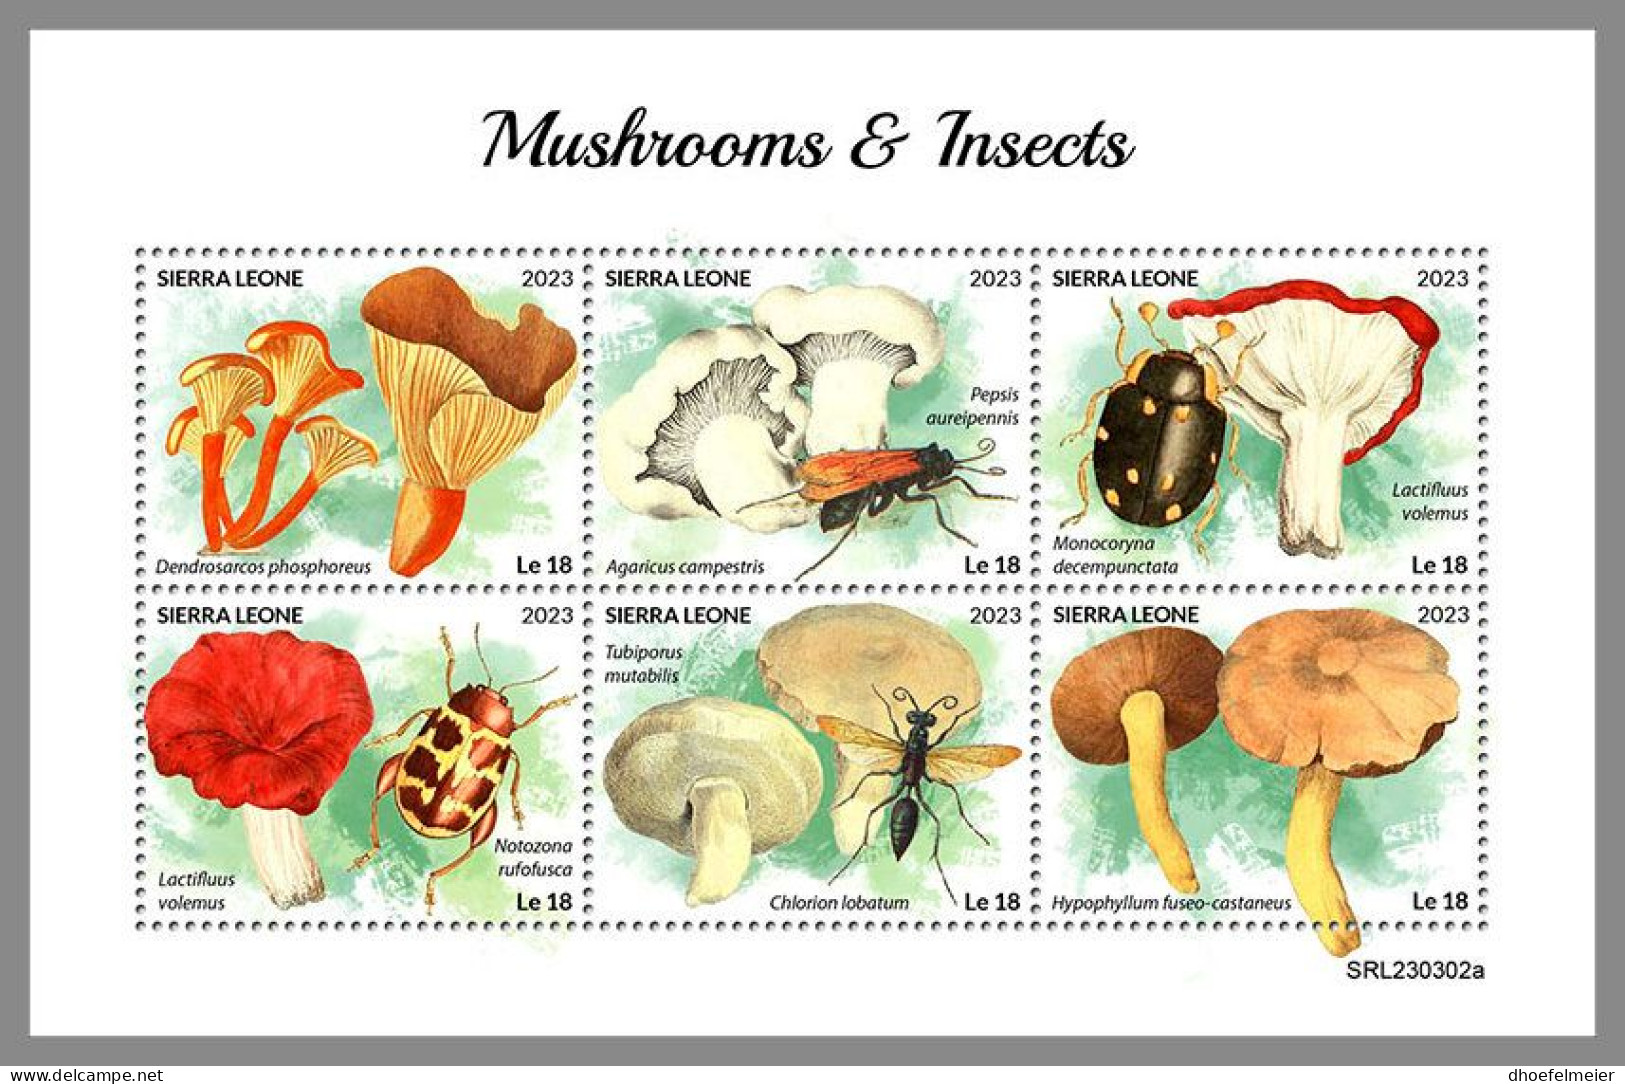 SIERRA LEONE 2023 MNH Mushrooms & Insects Pilze & Insekten M/S – IMPERFORATED – DHQ2418 - Champignons